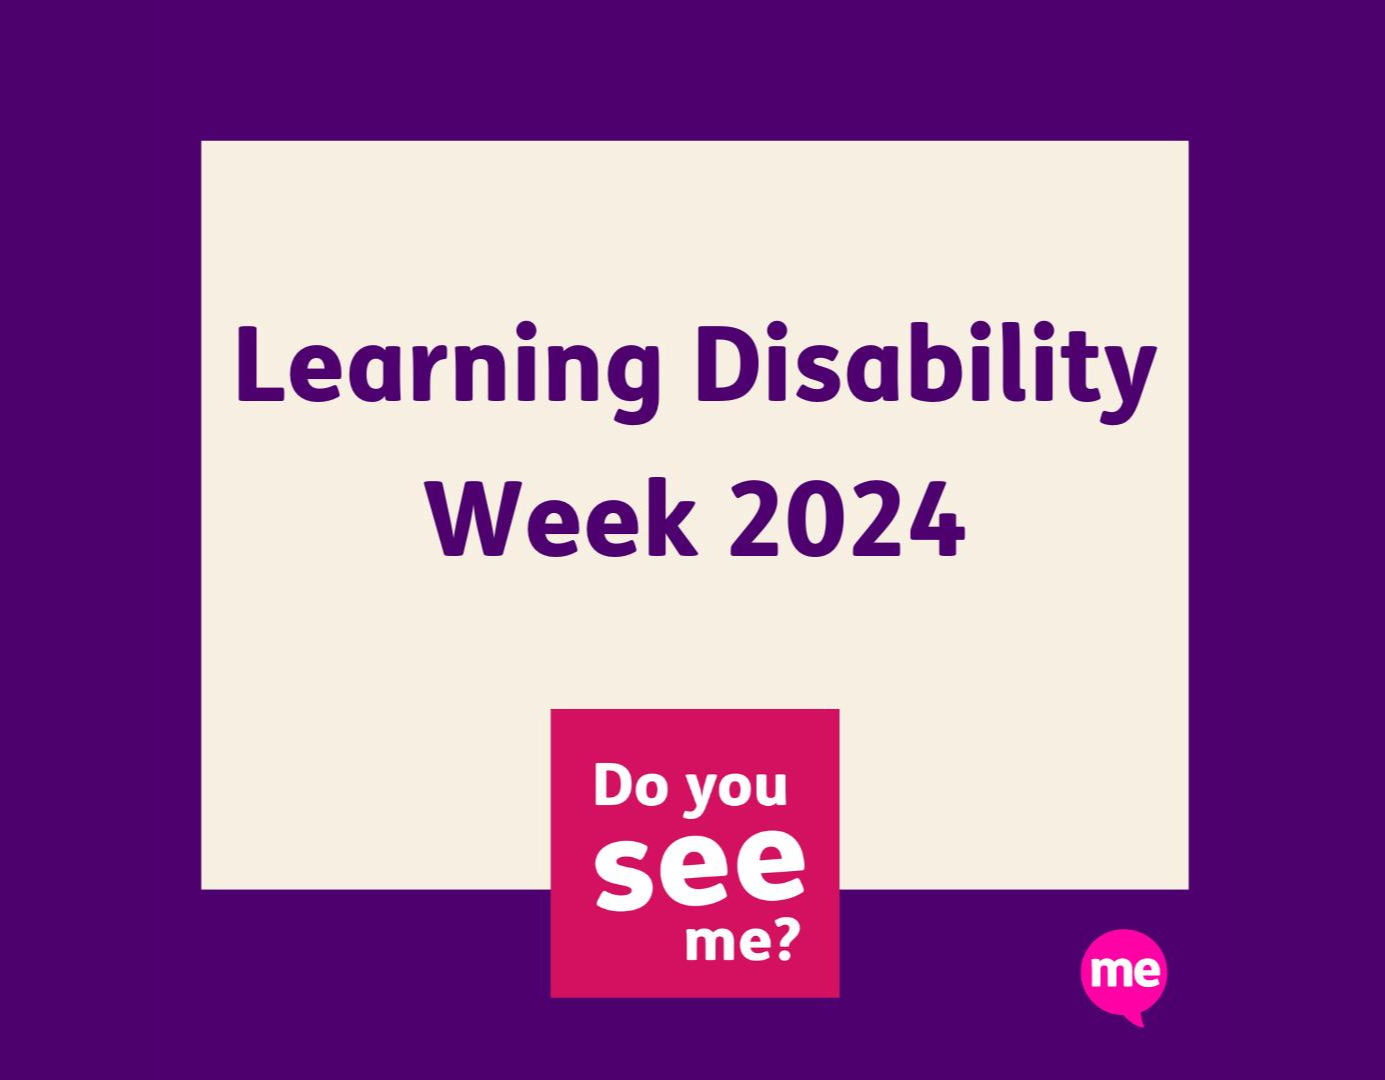 Purple background. White square with purple lettering saying Learning Disability Week 2024. Pink square with wording Do you see me?